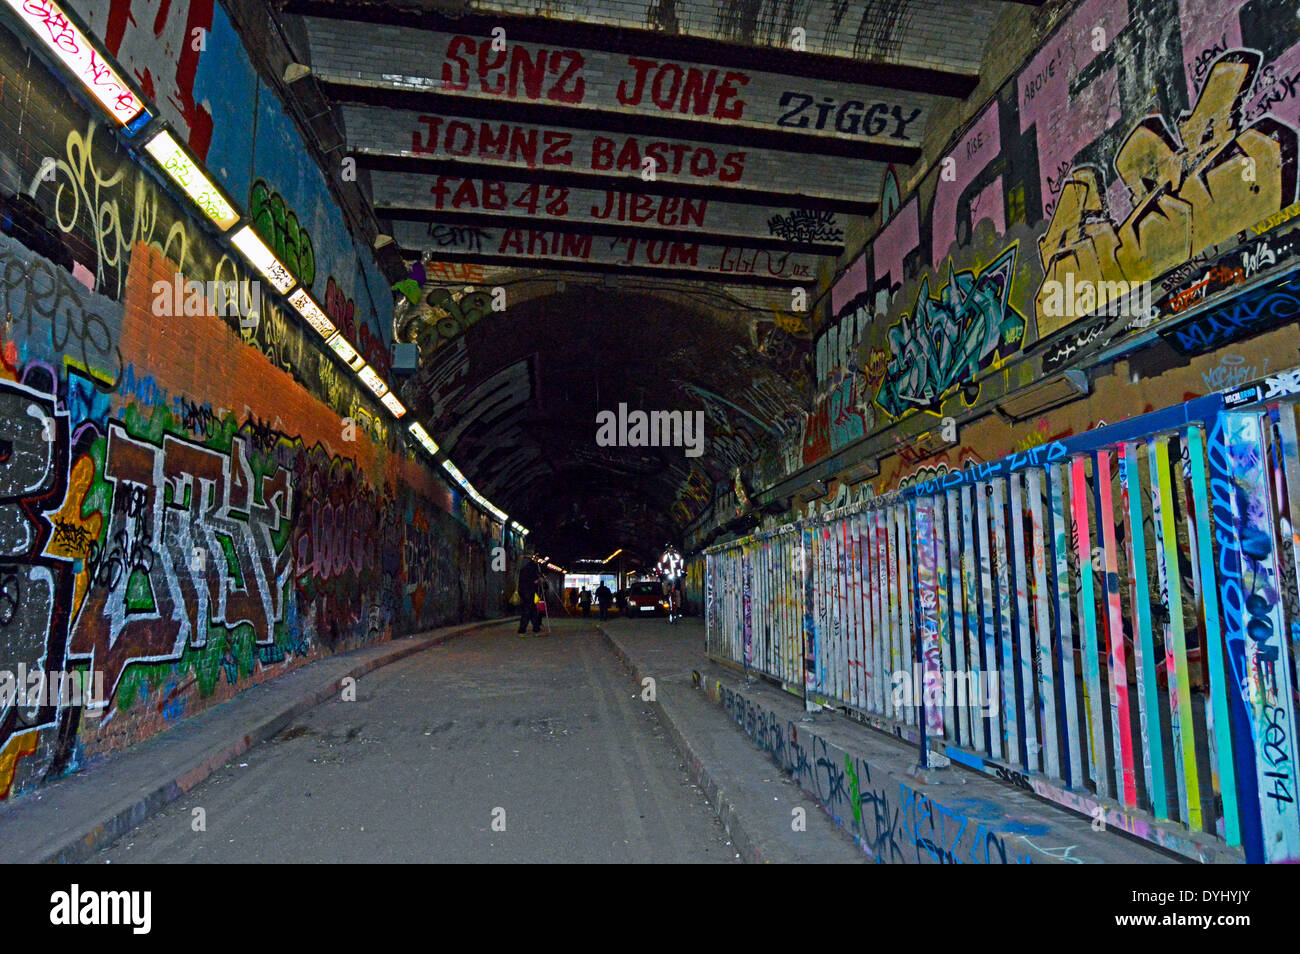 Leake Street, also known as the 'Banksy Tunnel' or 'Graffiti Tunnel', Waterloo, London, England, UK Stock Photo